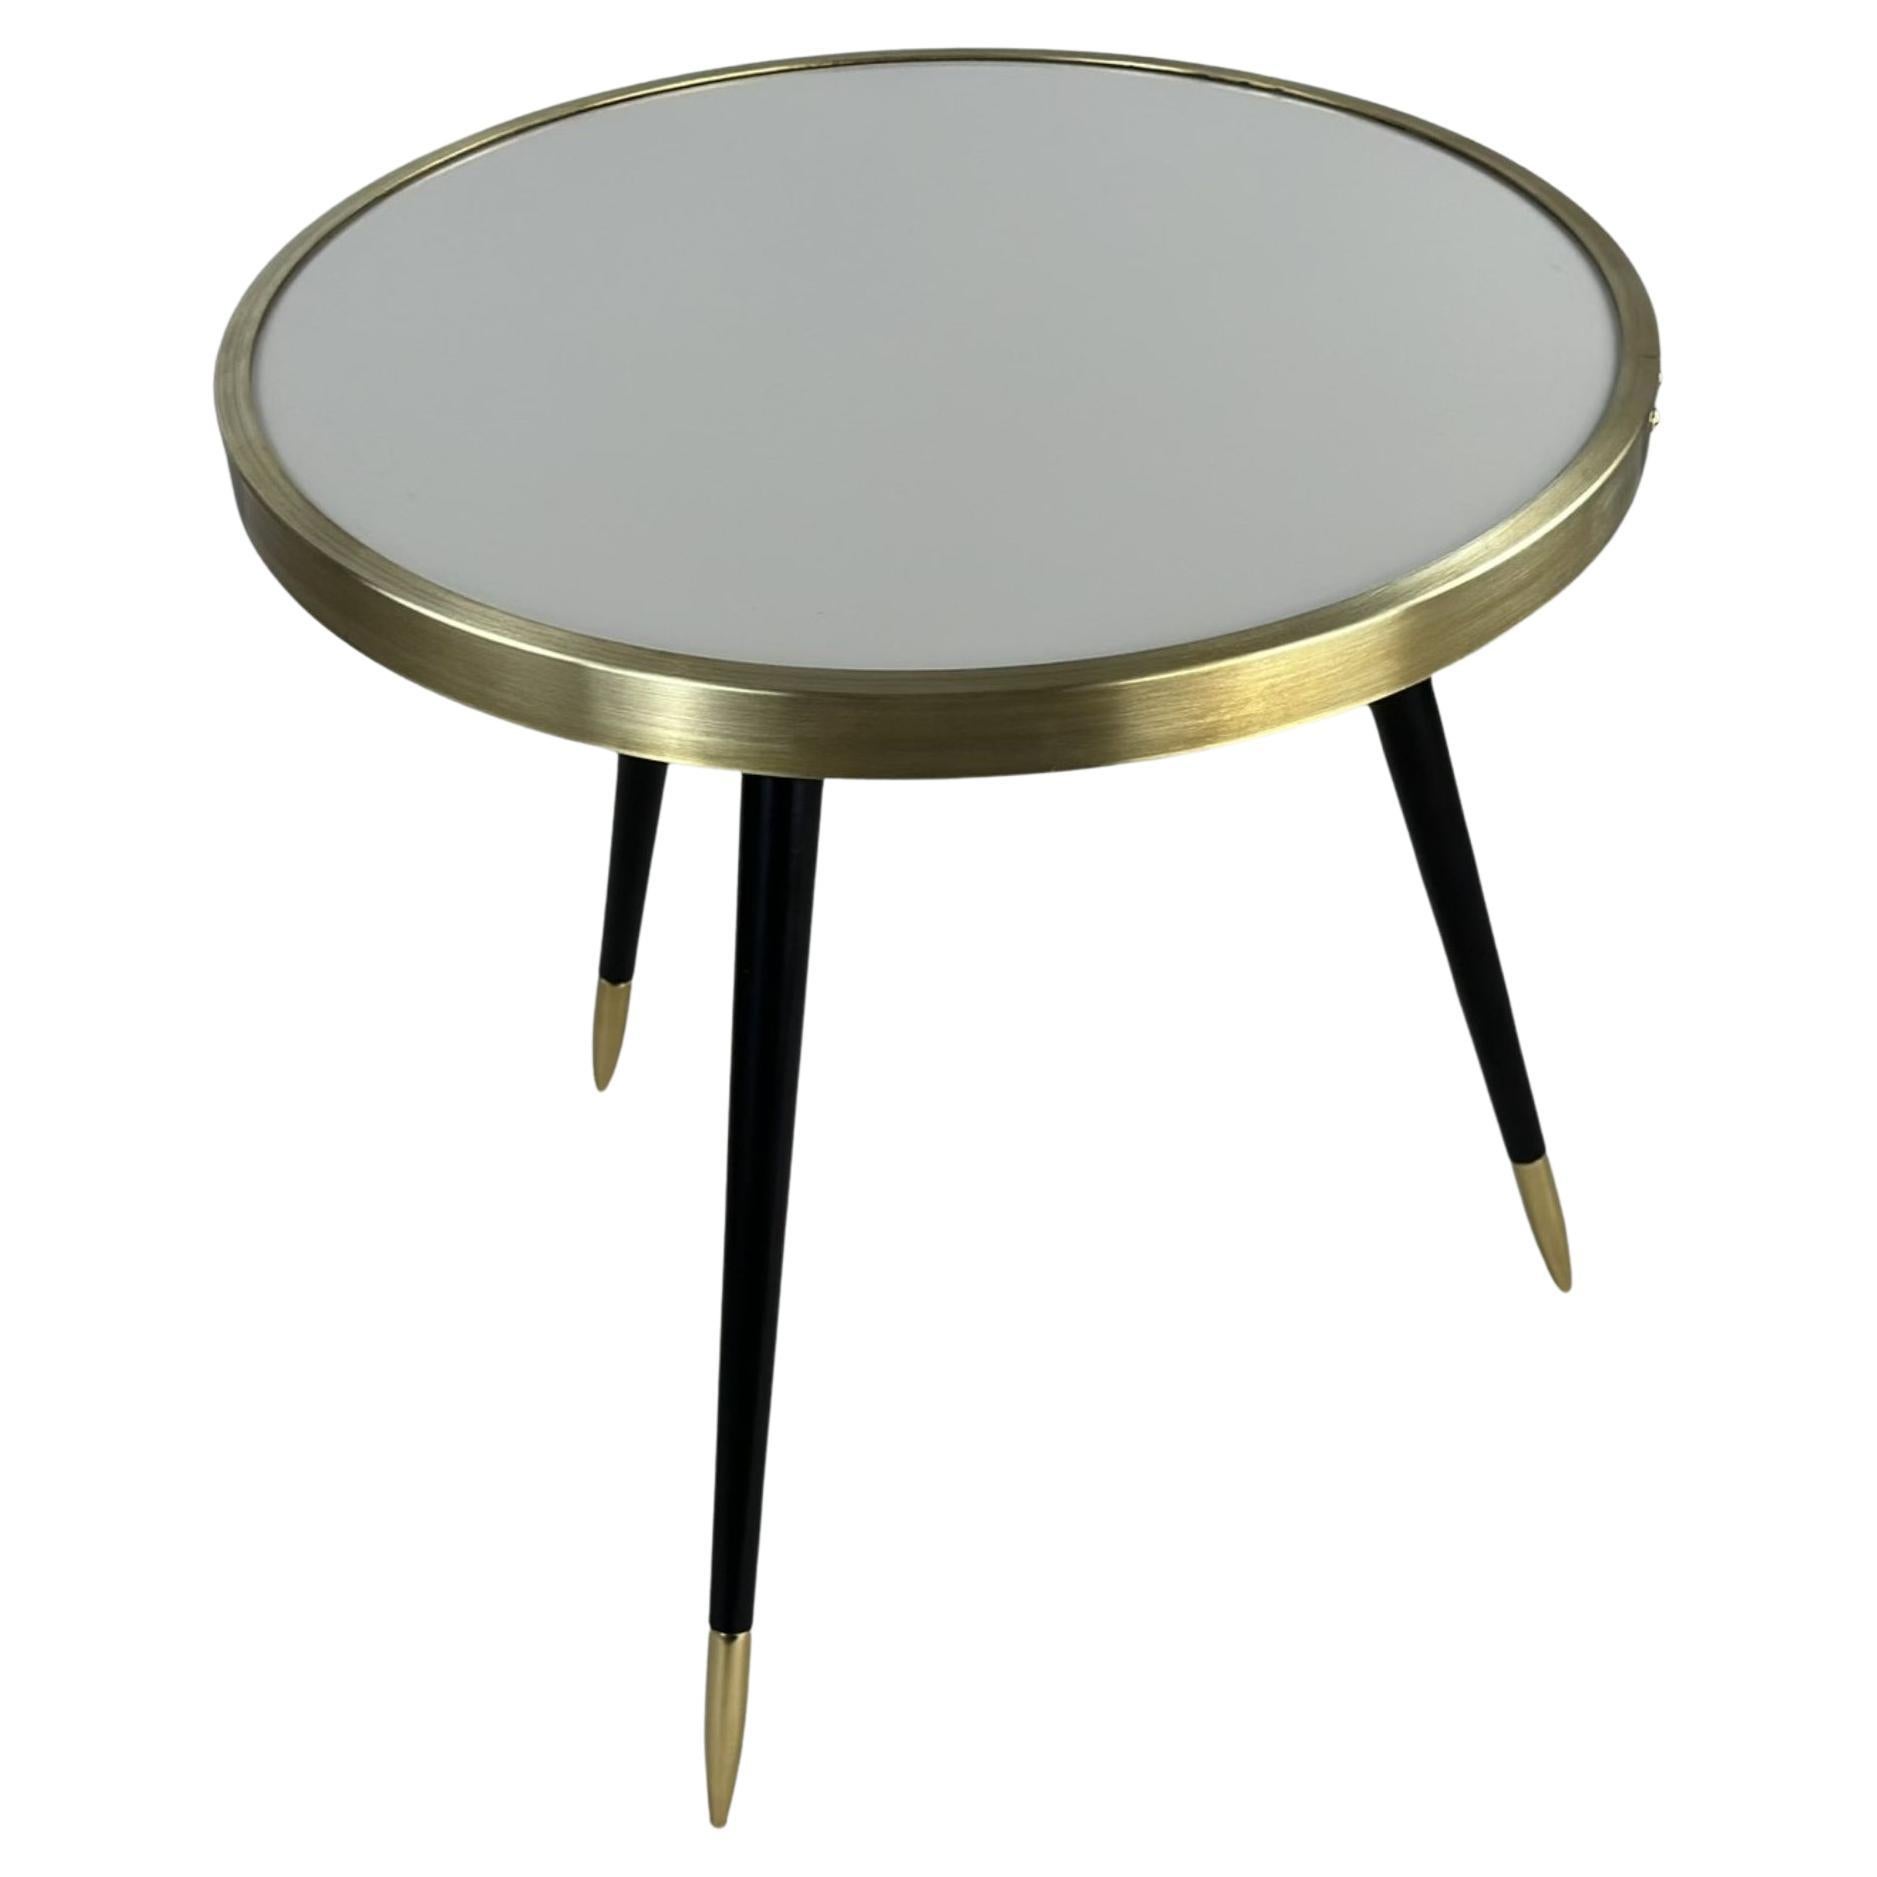 Round Twist Table, High Gloss Laminate & Brass Details, Handcrafted, Size S For Sale